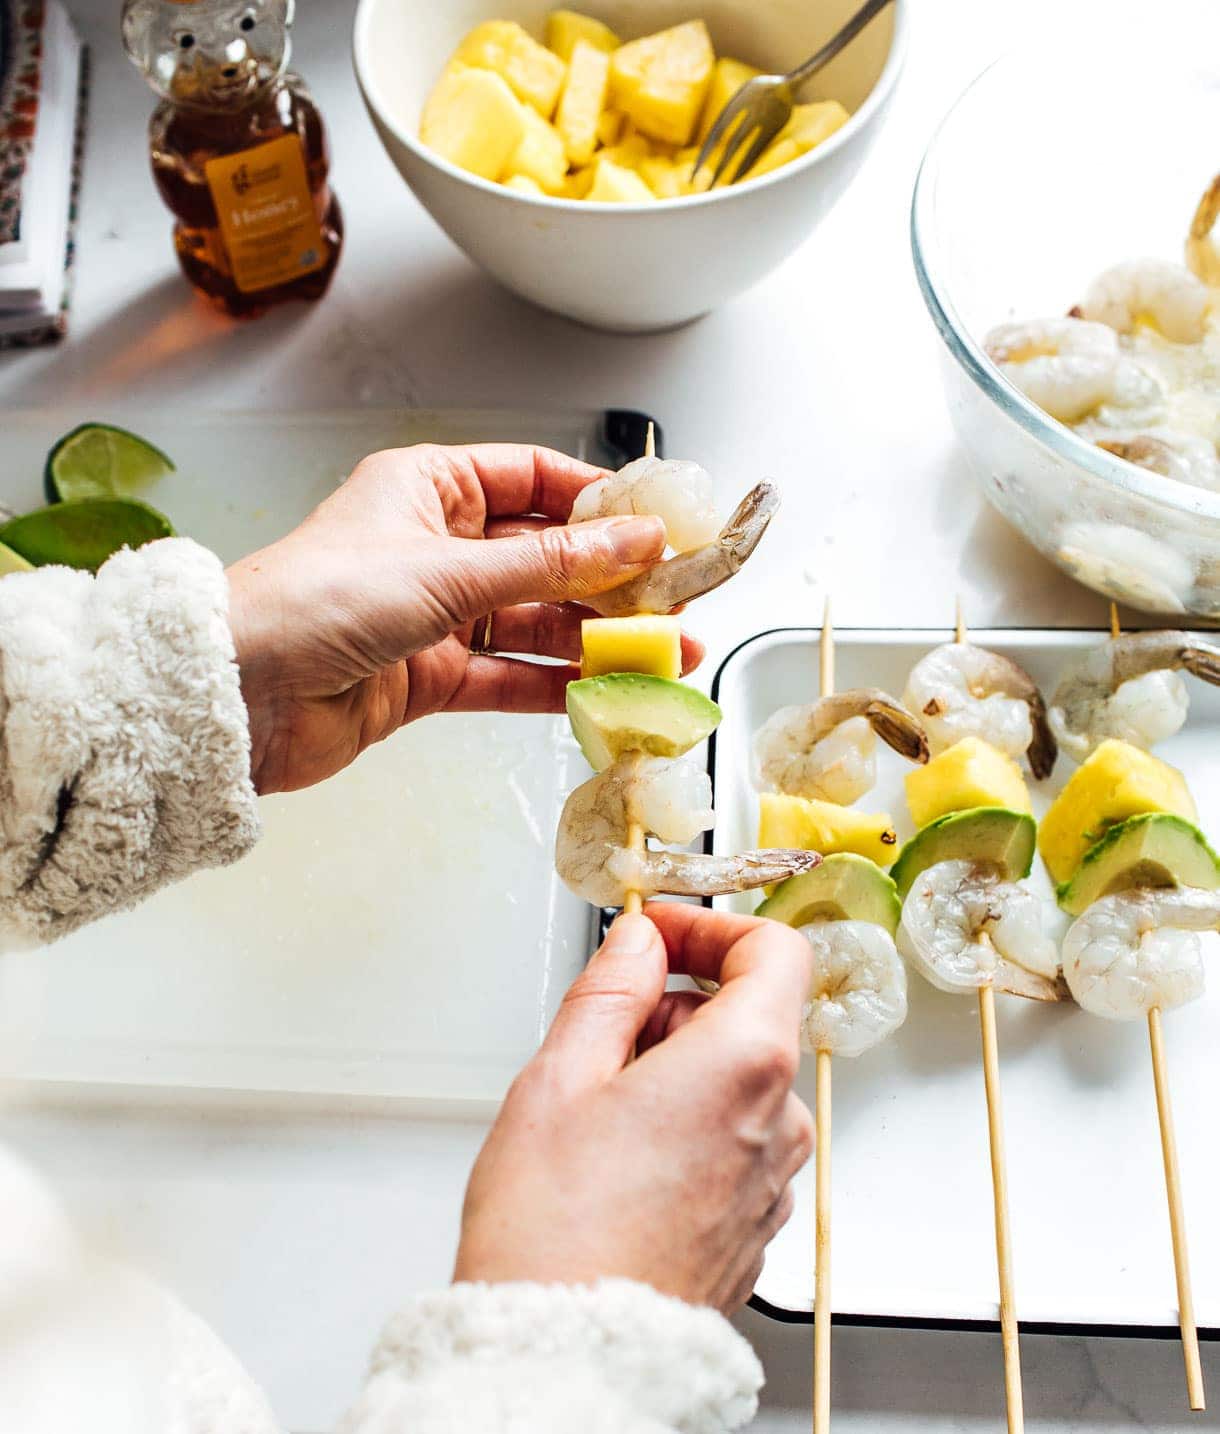 threaded shrimp, avocado, and pineapple onto wooden skewers